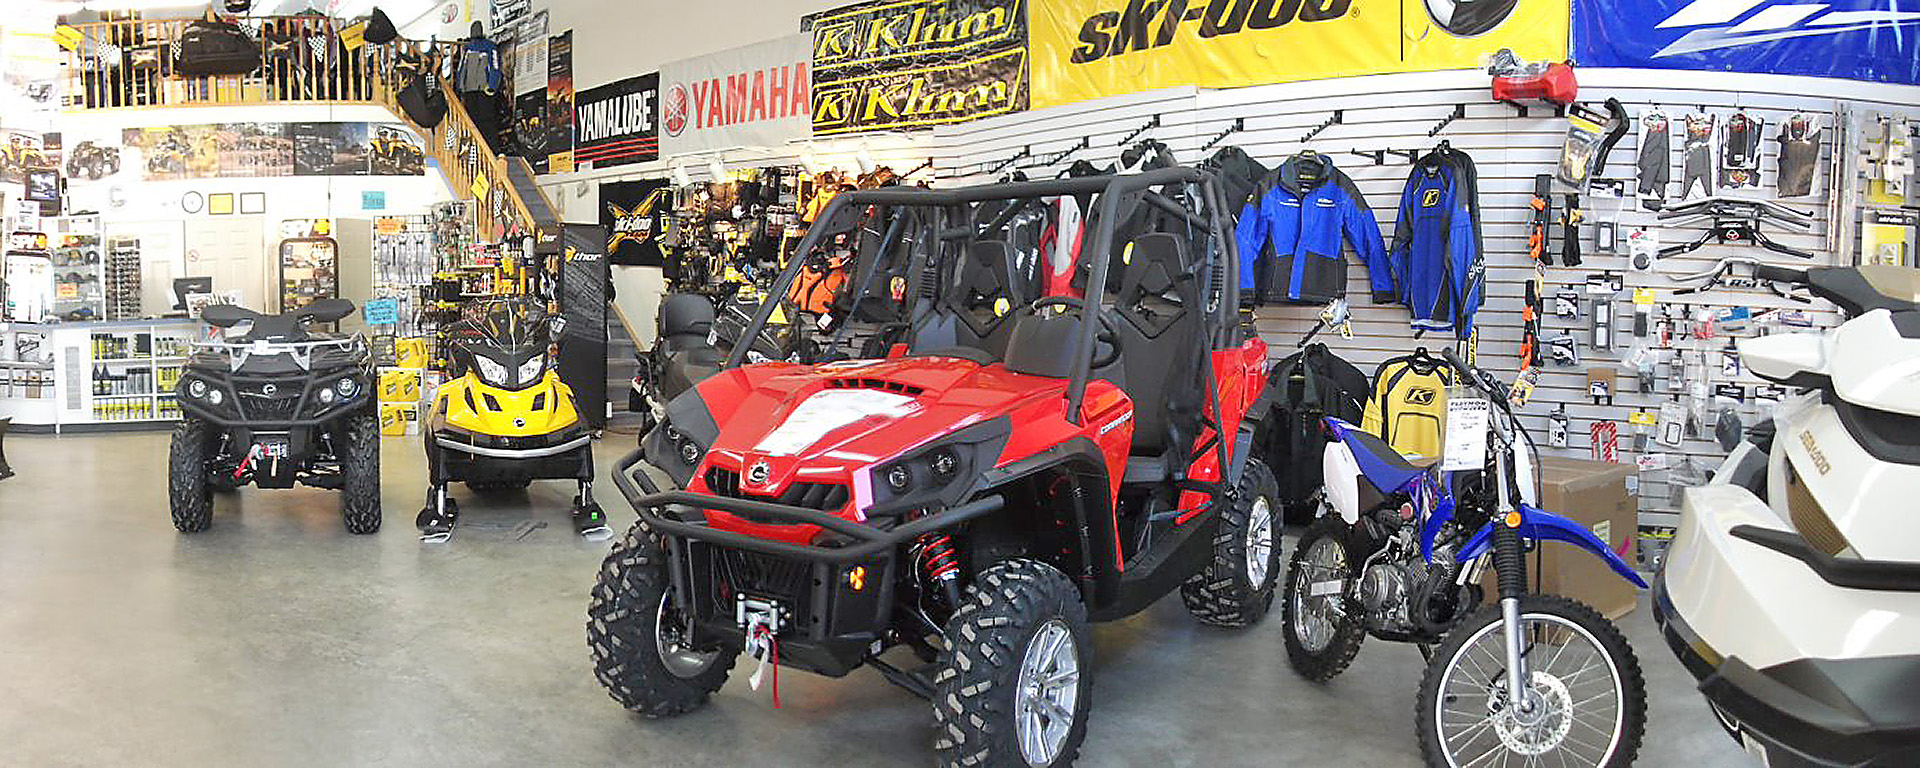 ATVs and side-by-side machines lined up in a showroom at Playmor Power Products 